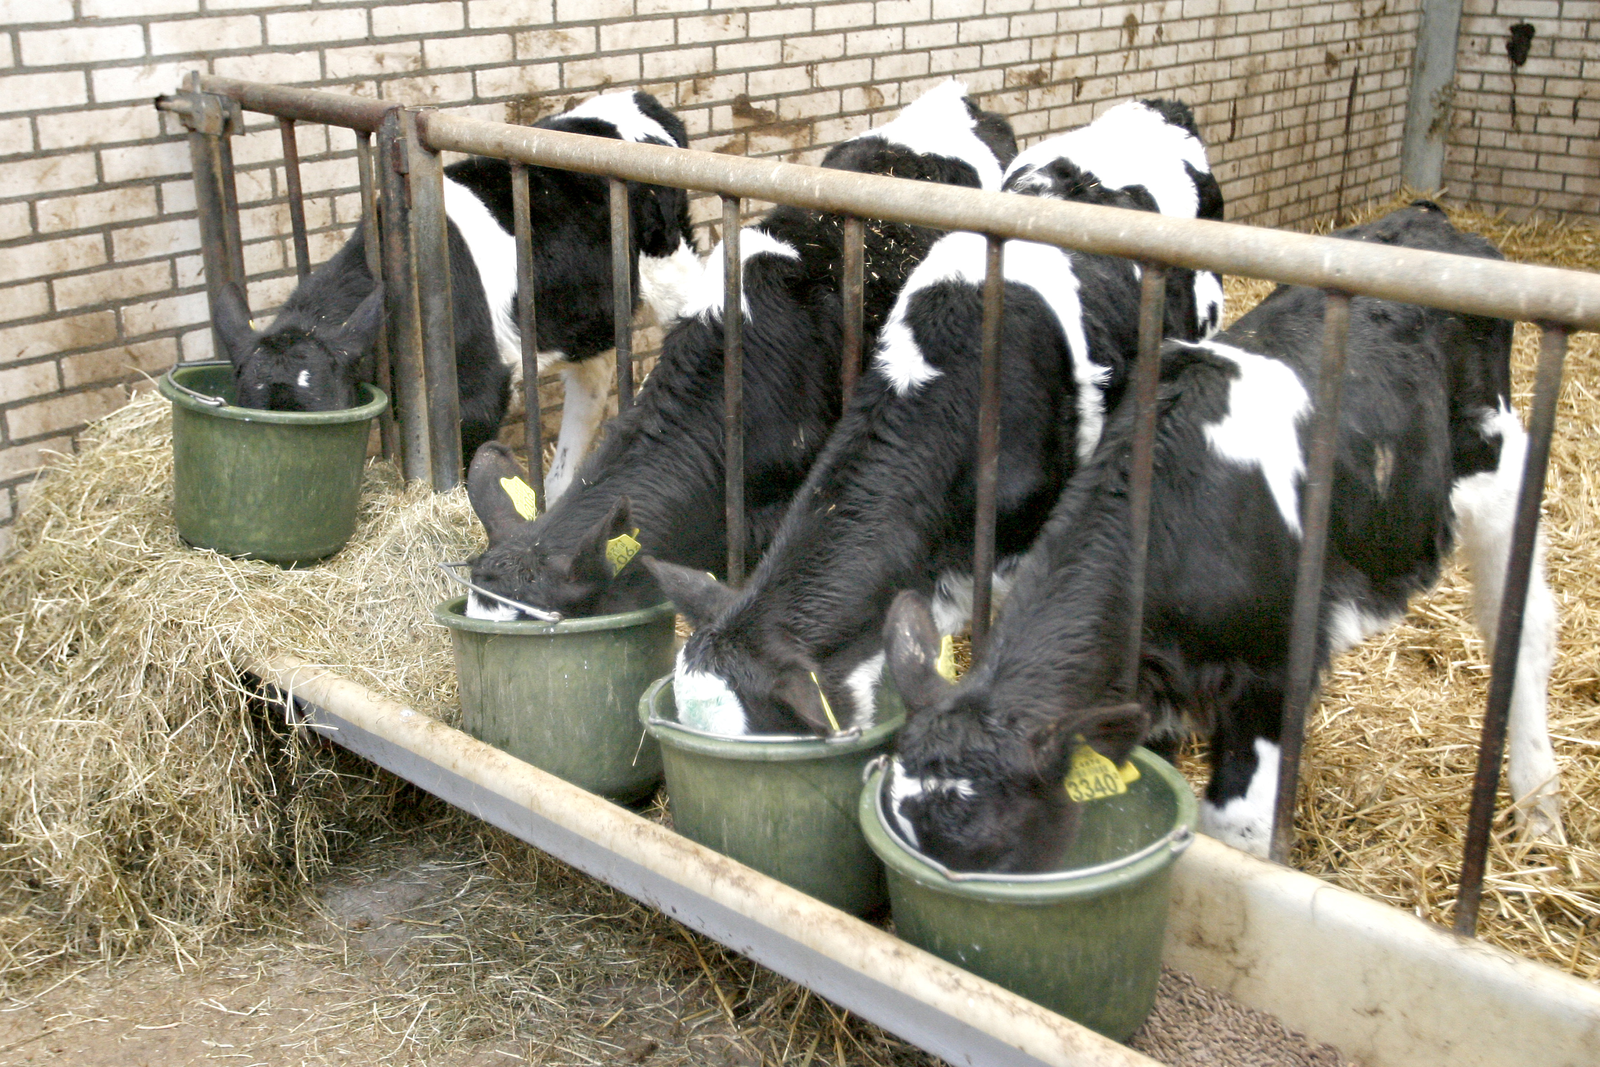 ‘No automatic approvals of antibiotics in feed’